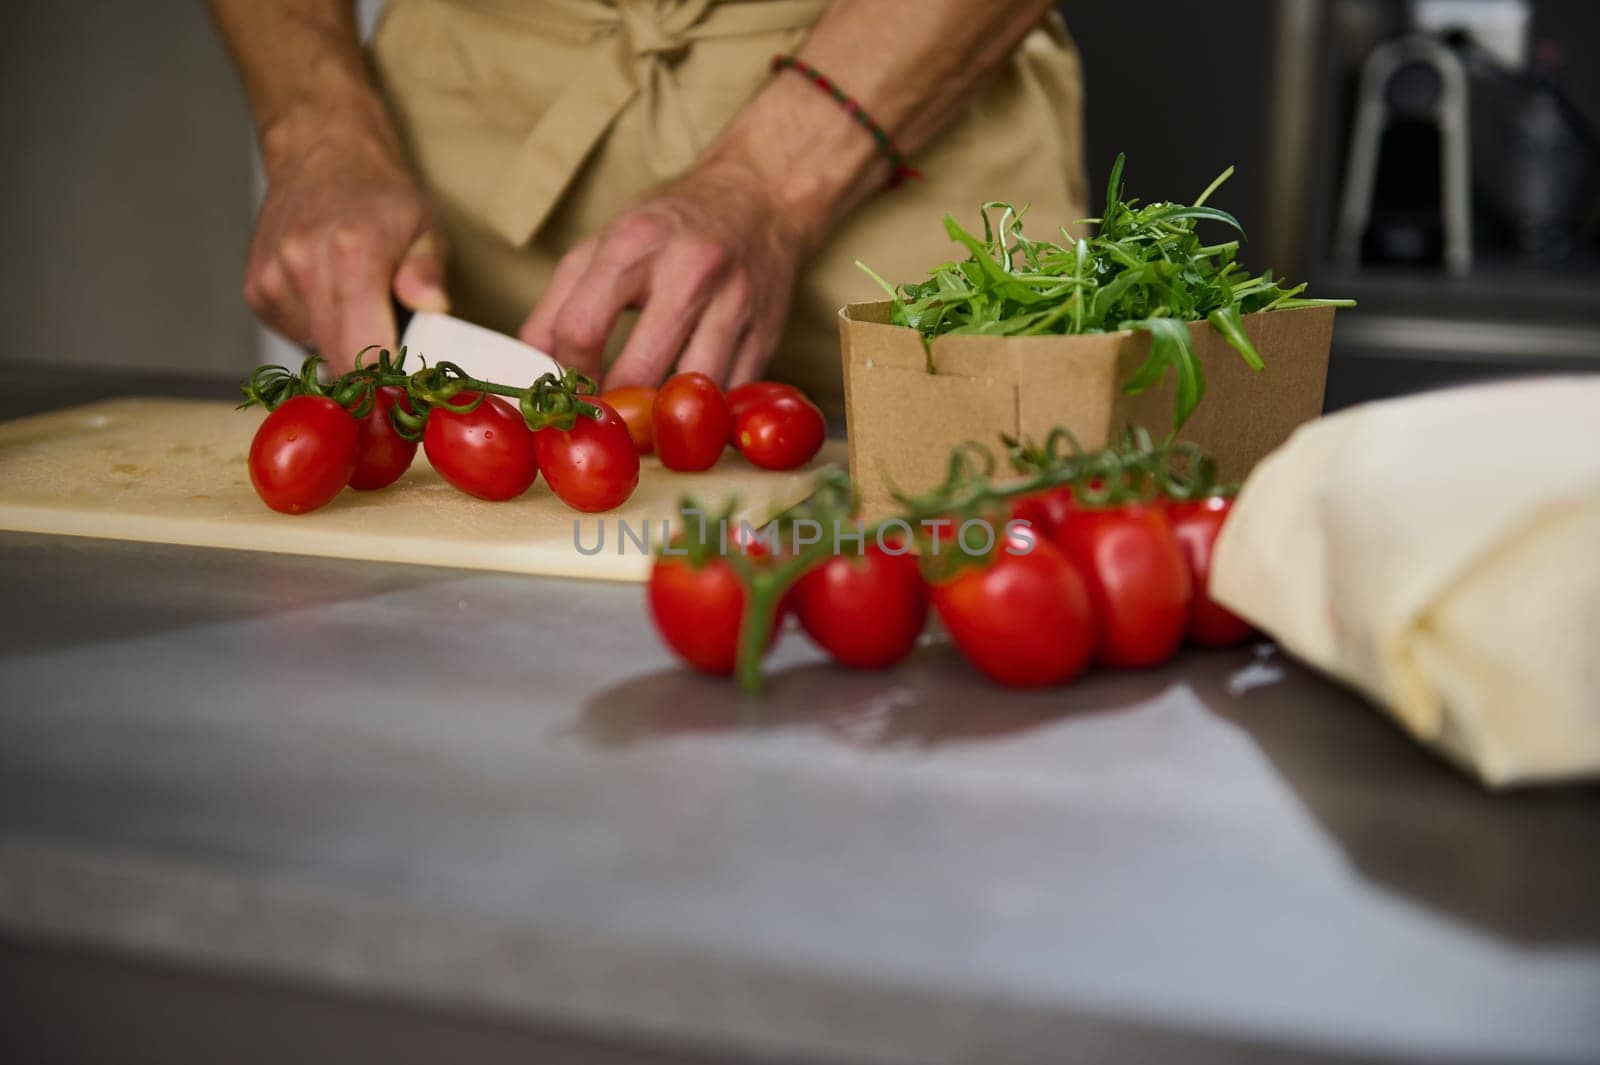 Close-up view of a male chef's hands chopping tomato cherry on a cutting board. Ingredients on the kitchen table. Man cooking healthy salad in the minimalist home kitchen interior by artgf